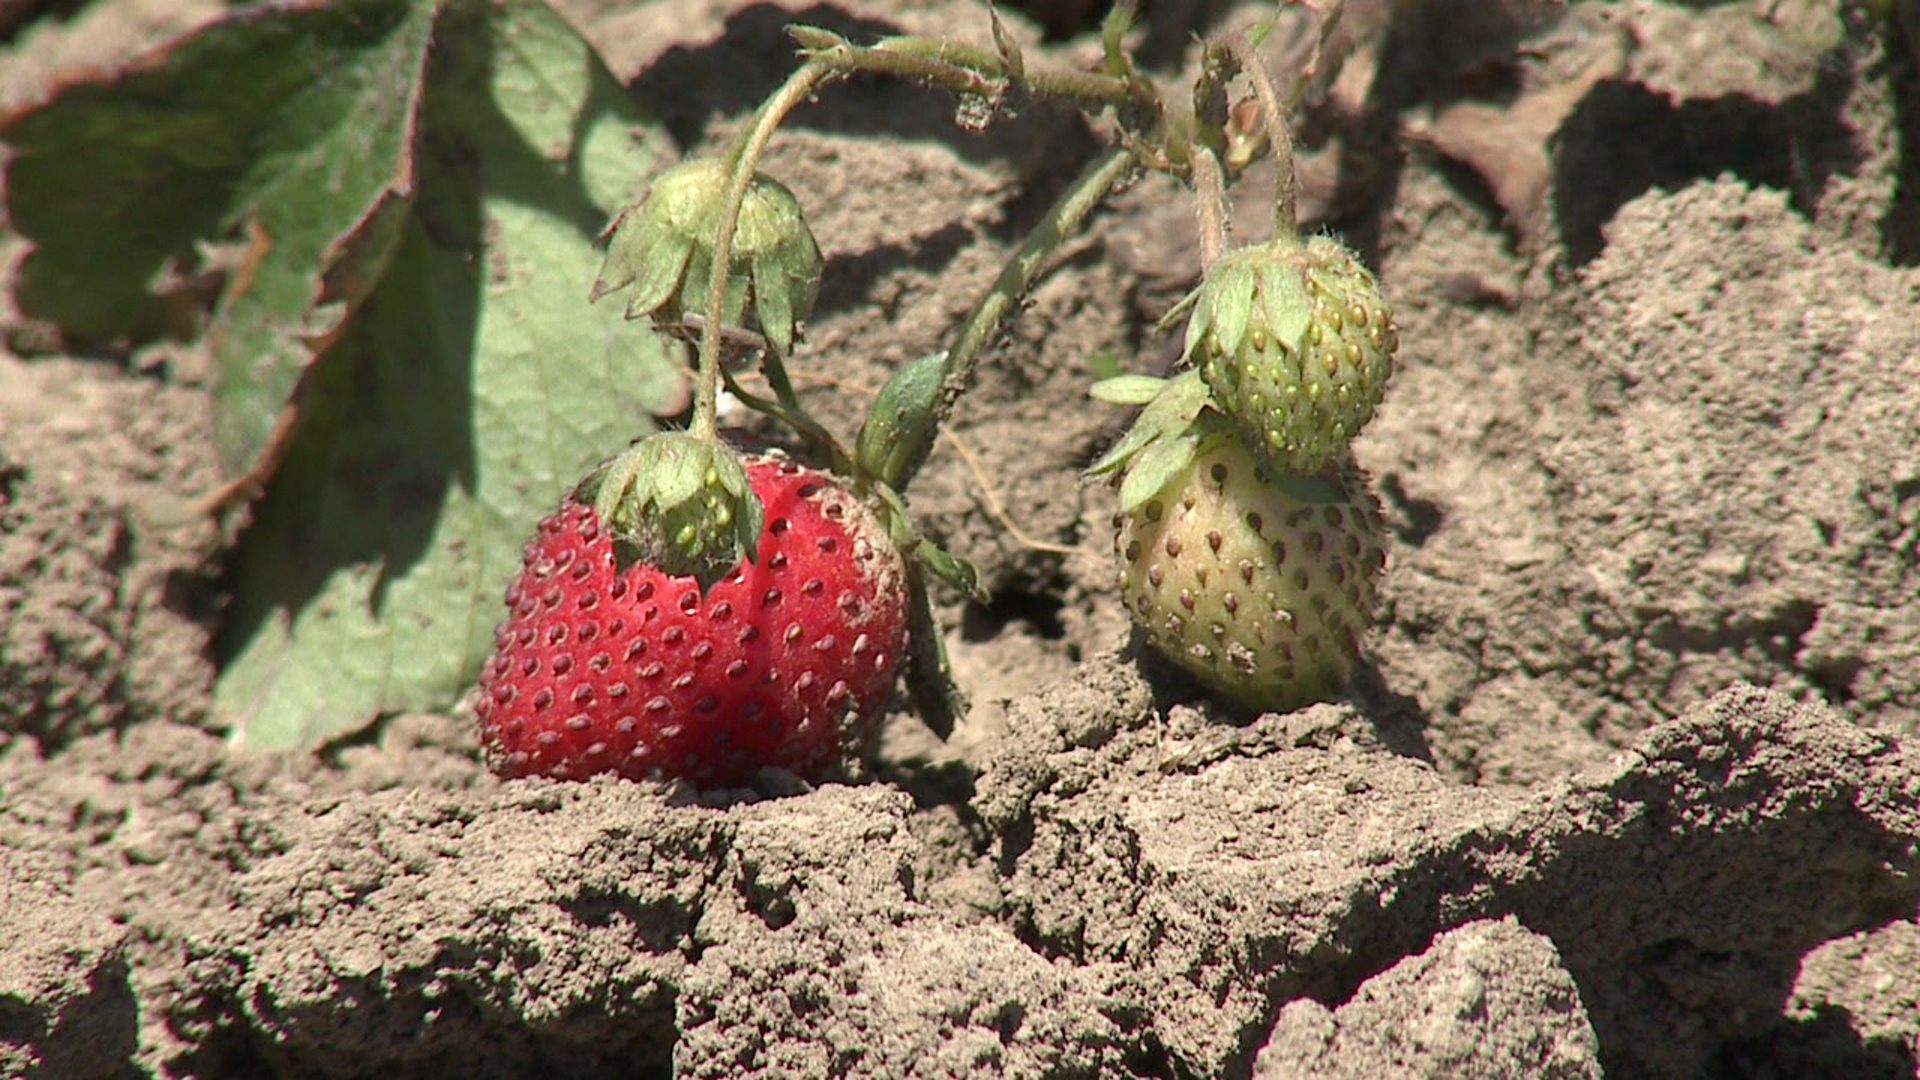 A tough early season for strawberries